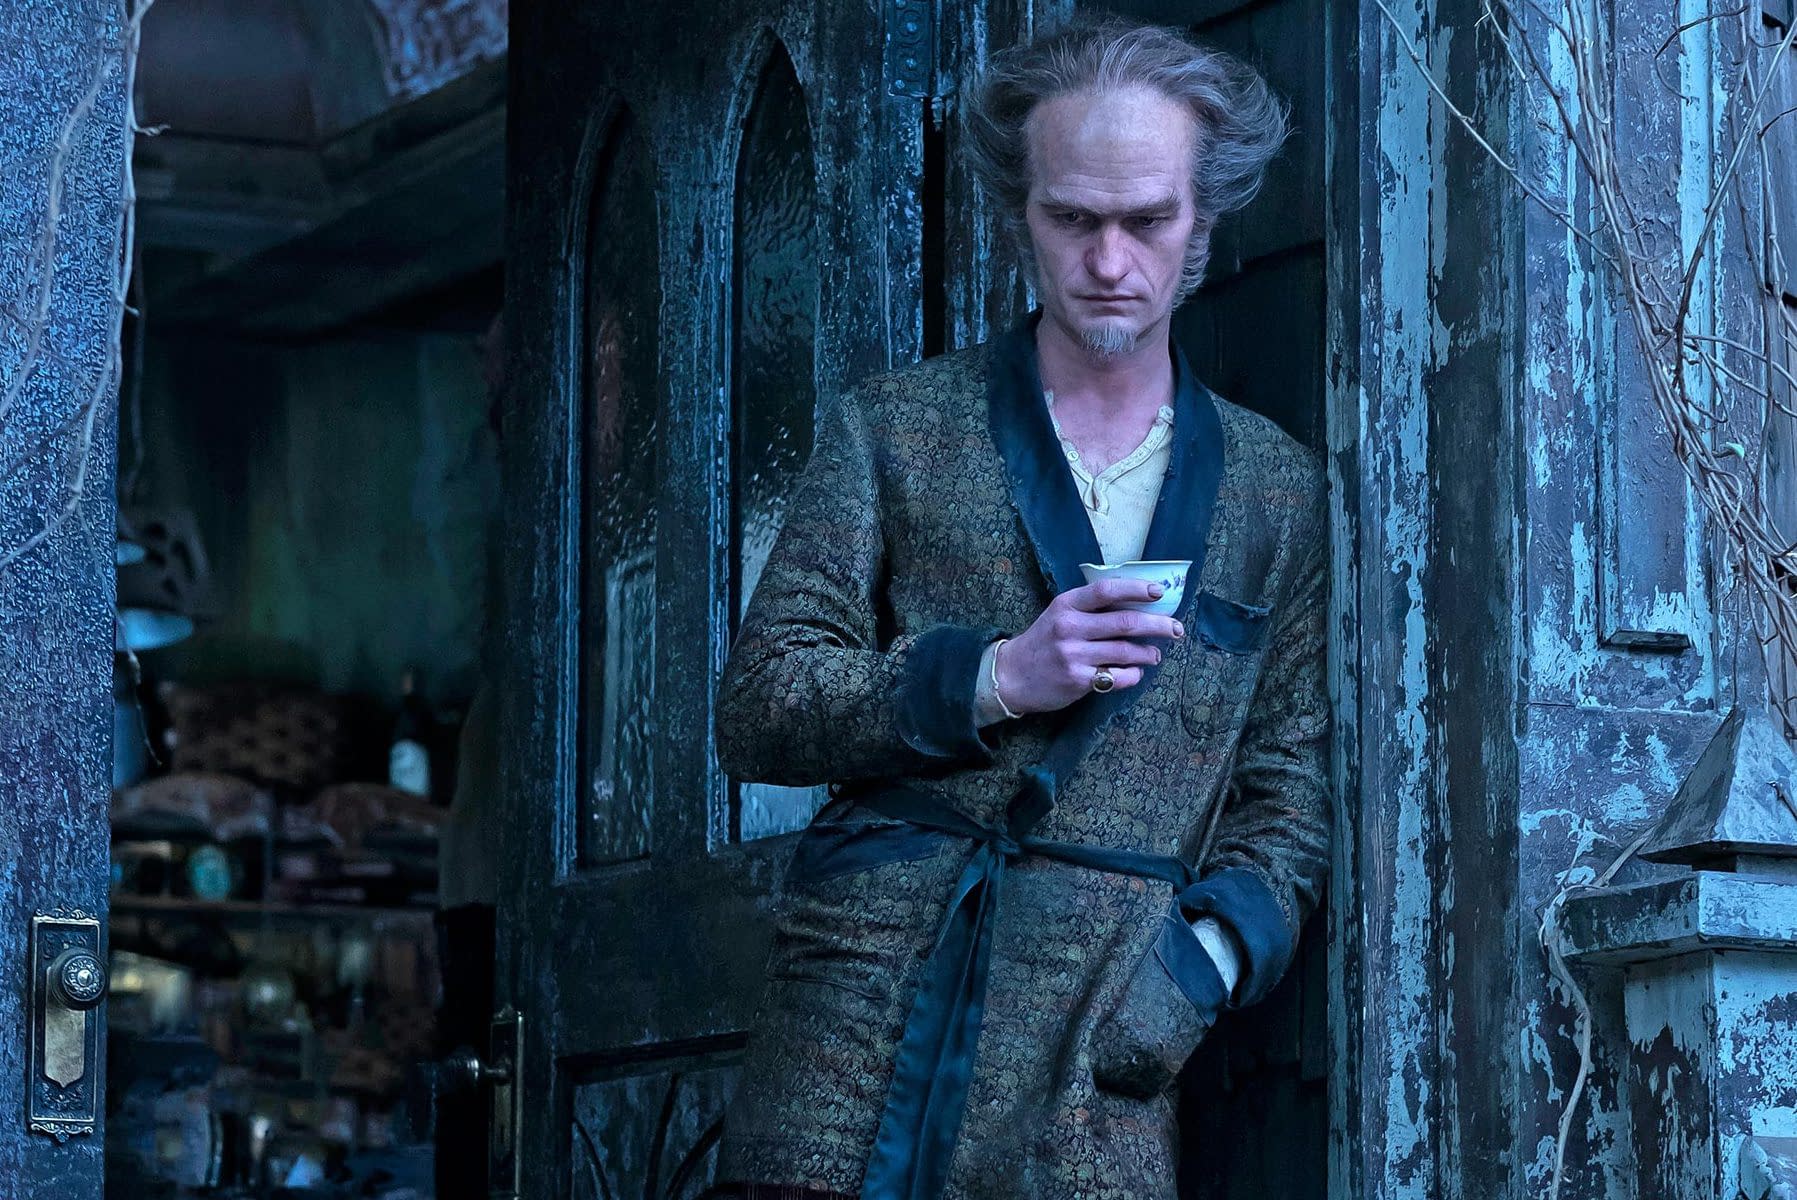 Lemony Snicket's A Series of Unfortunate Events Season 3 is a Good Pain [SPOILER REVIEW]